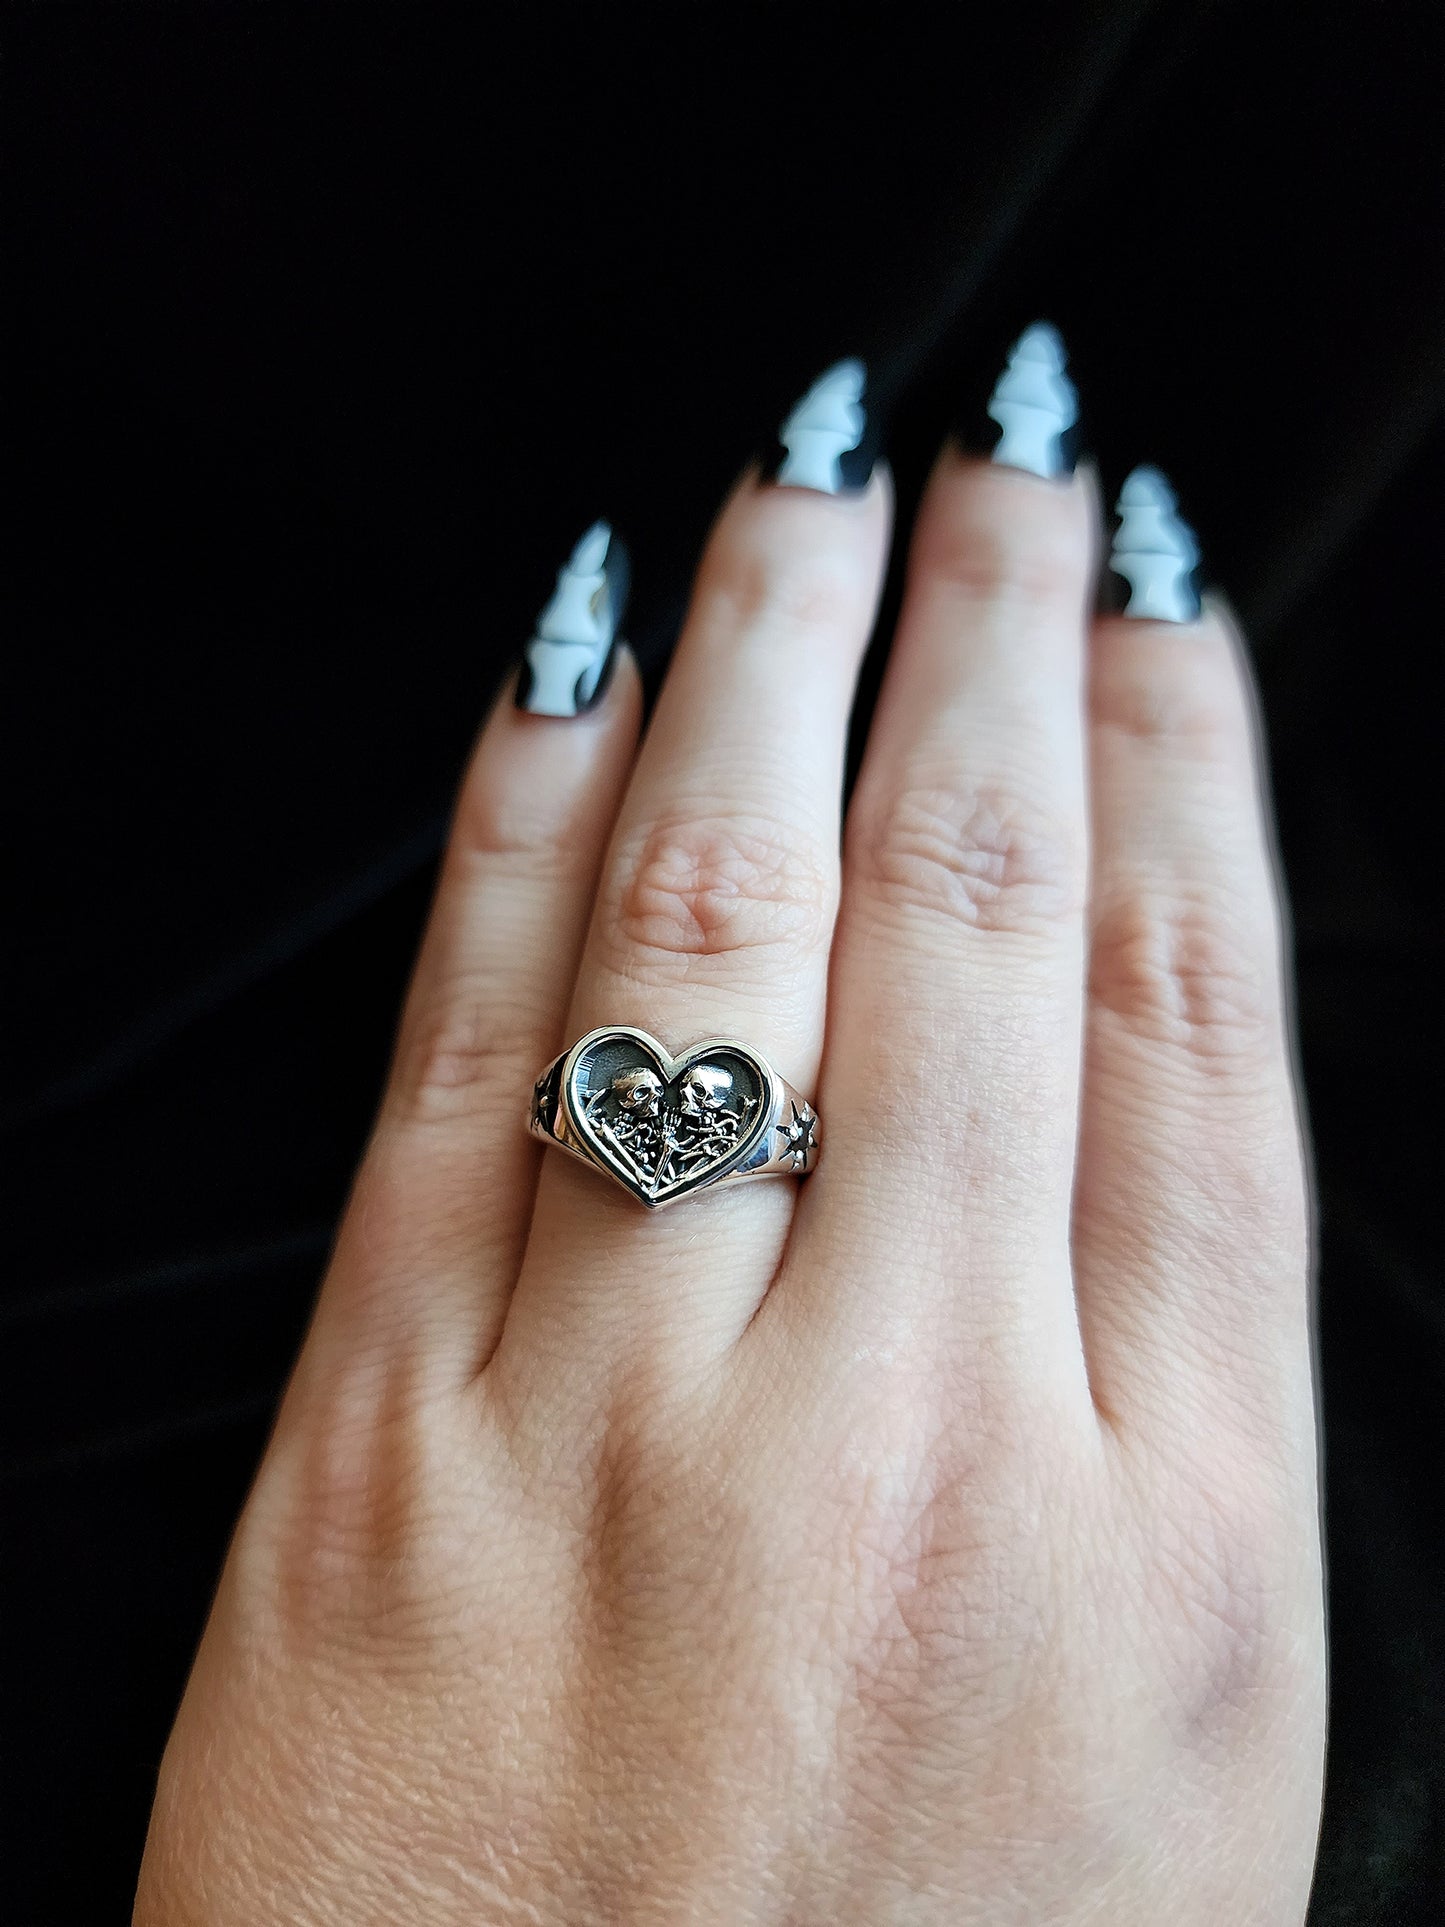 14k Gold or Silver Heart Signet Ring The Lovers Skeleton Final Embrace - Gothic Romantic Engagement Ring Salt & Pepper Diamonds Memento Mori Modern Mourning Ready to Ship Size 6-8